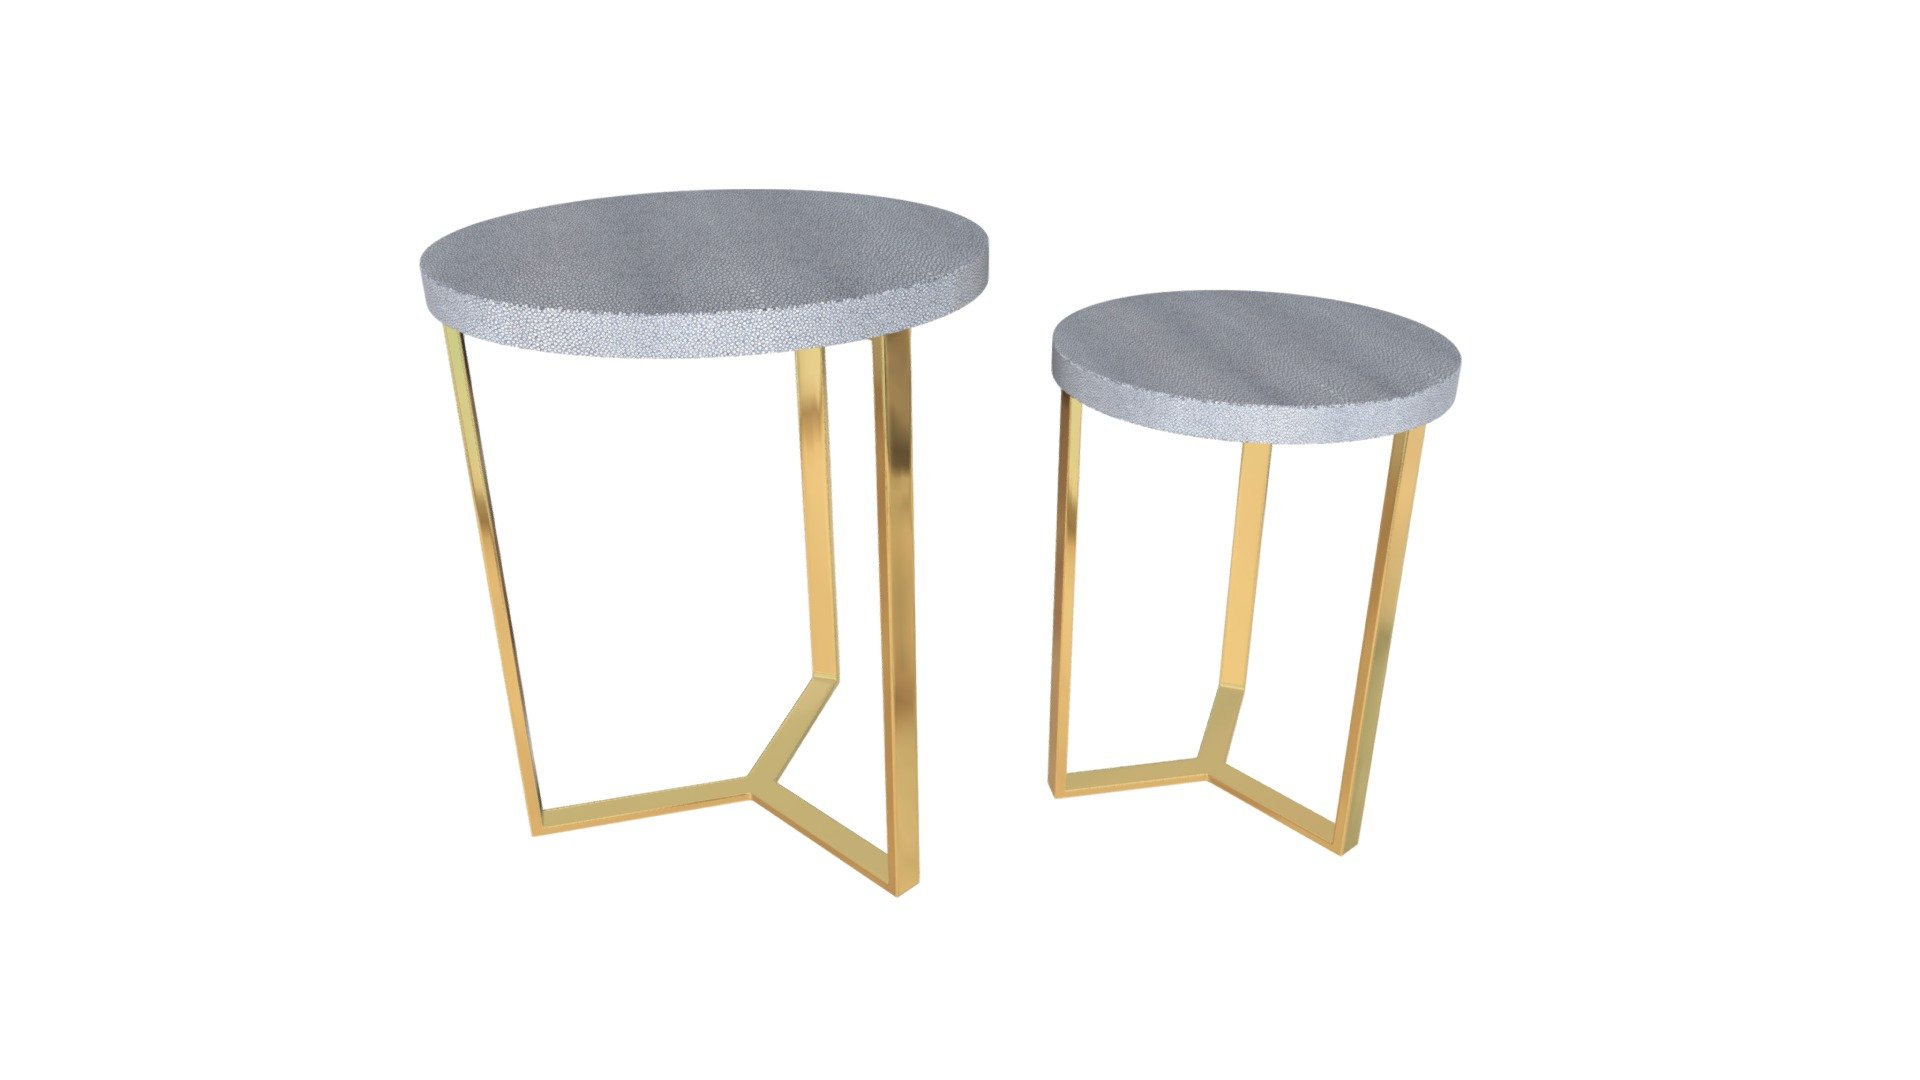 https://zuomod.com/Gela-Set-of-2-Round-Tables-Gray

This dynamic duo will stand elegantly next to a sofa, chair or bed to hold your drink, favorite book or a pair of reading glasses. The surfaces are wrapped in textured faux shagreen in versatile gray and rest on polished gold legs. Simply stunning 3d model